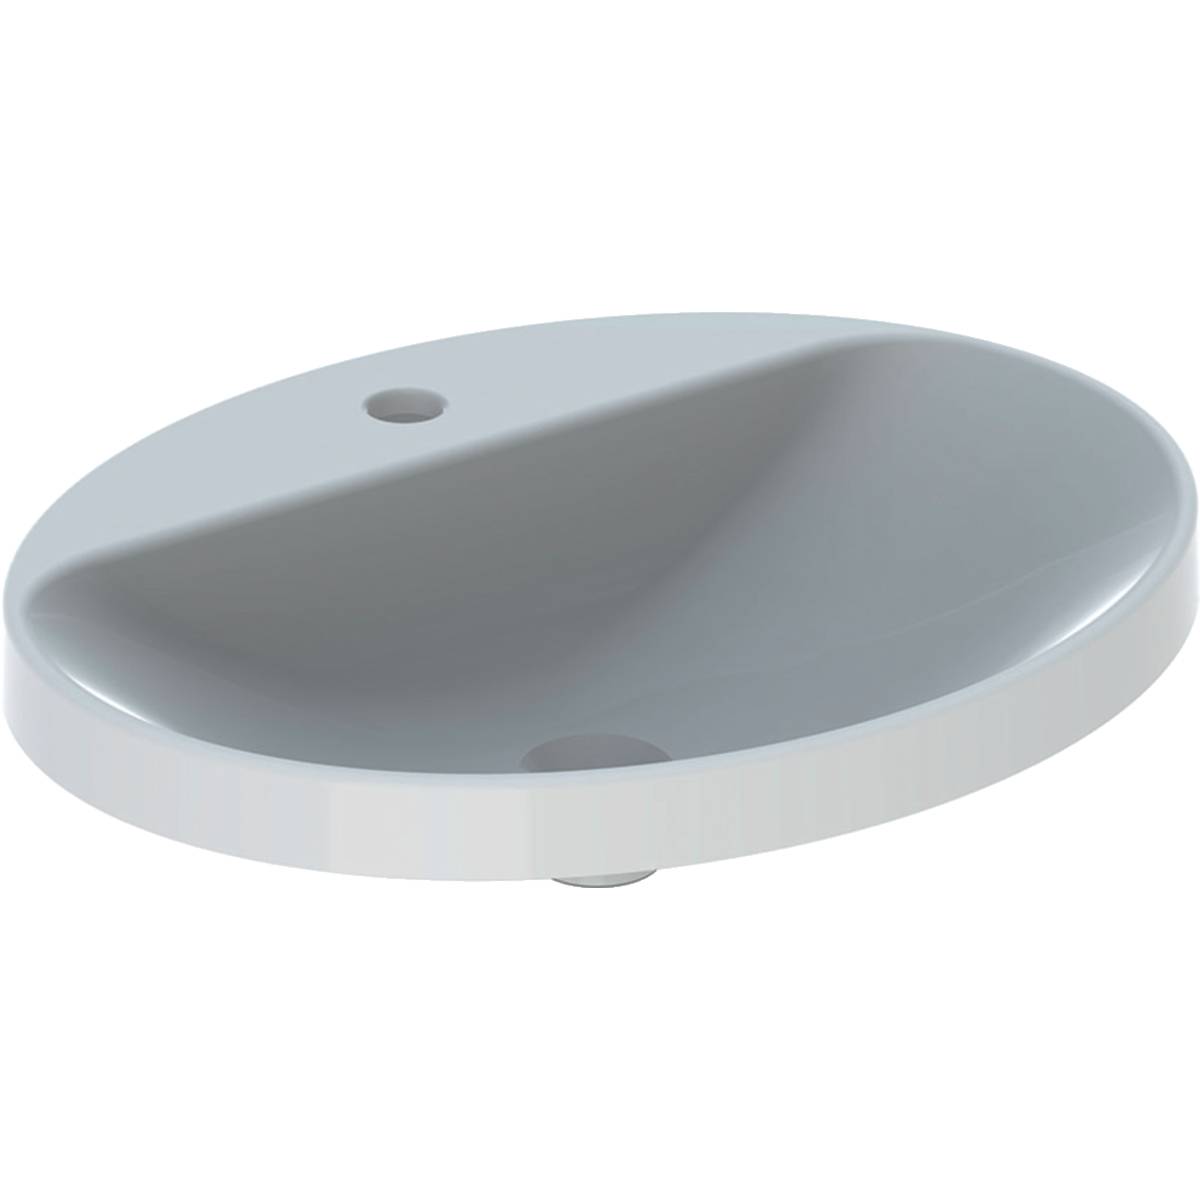 VariForm Countertop Washbasin, Oval, with Tap Hole Bench